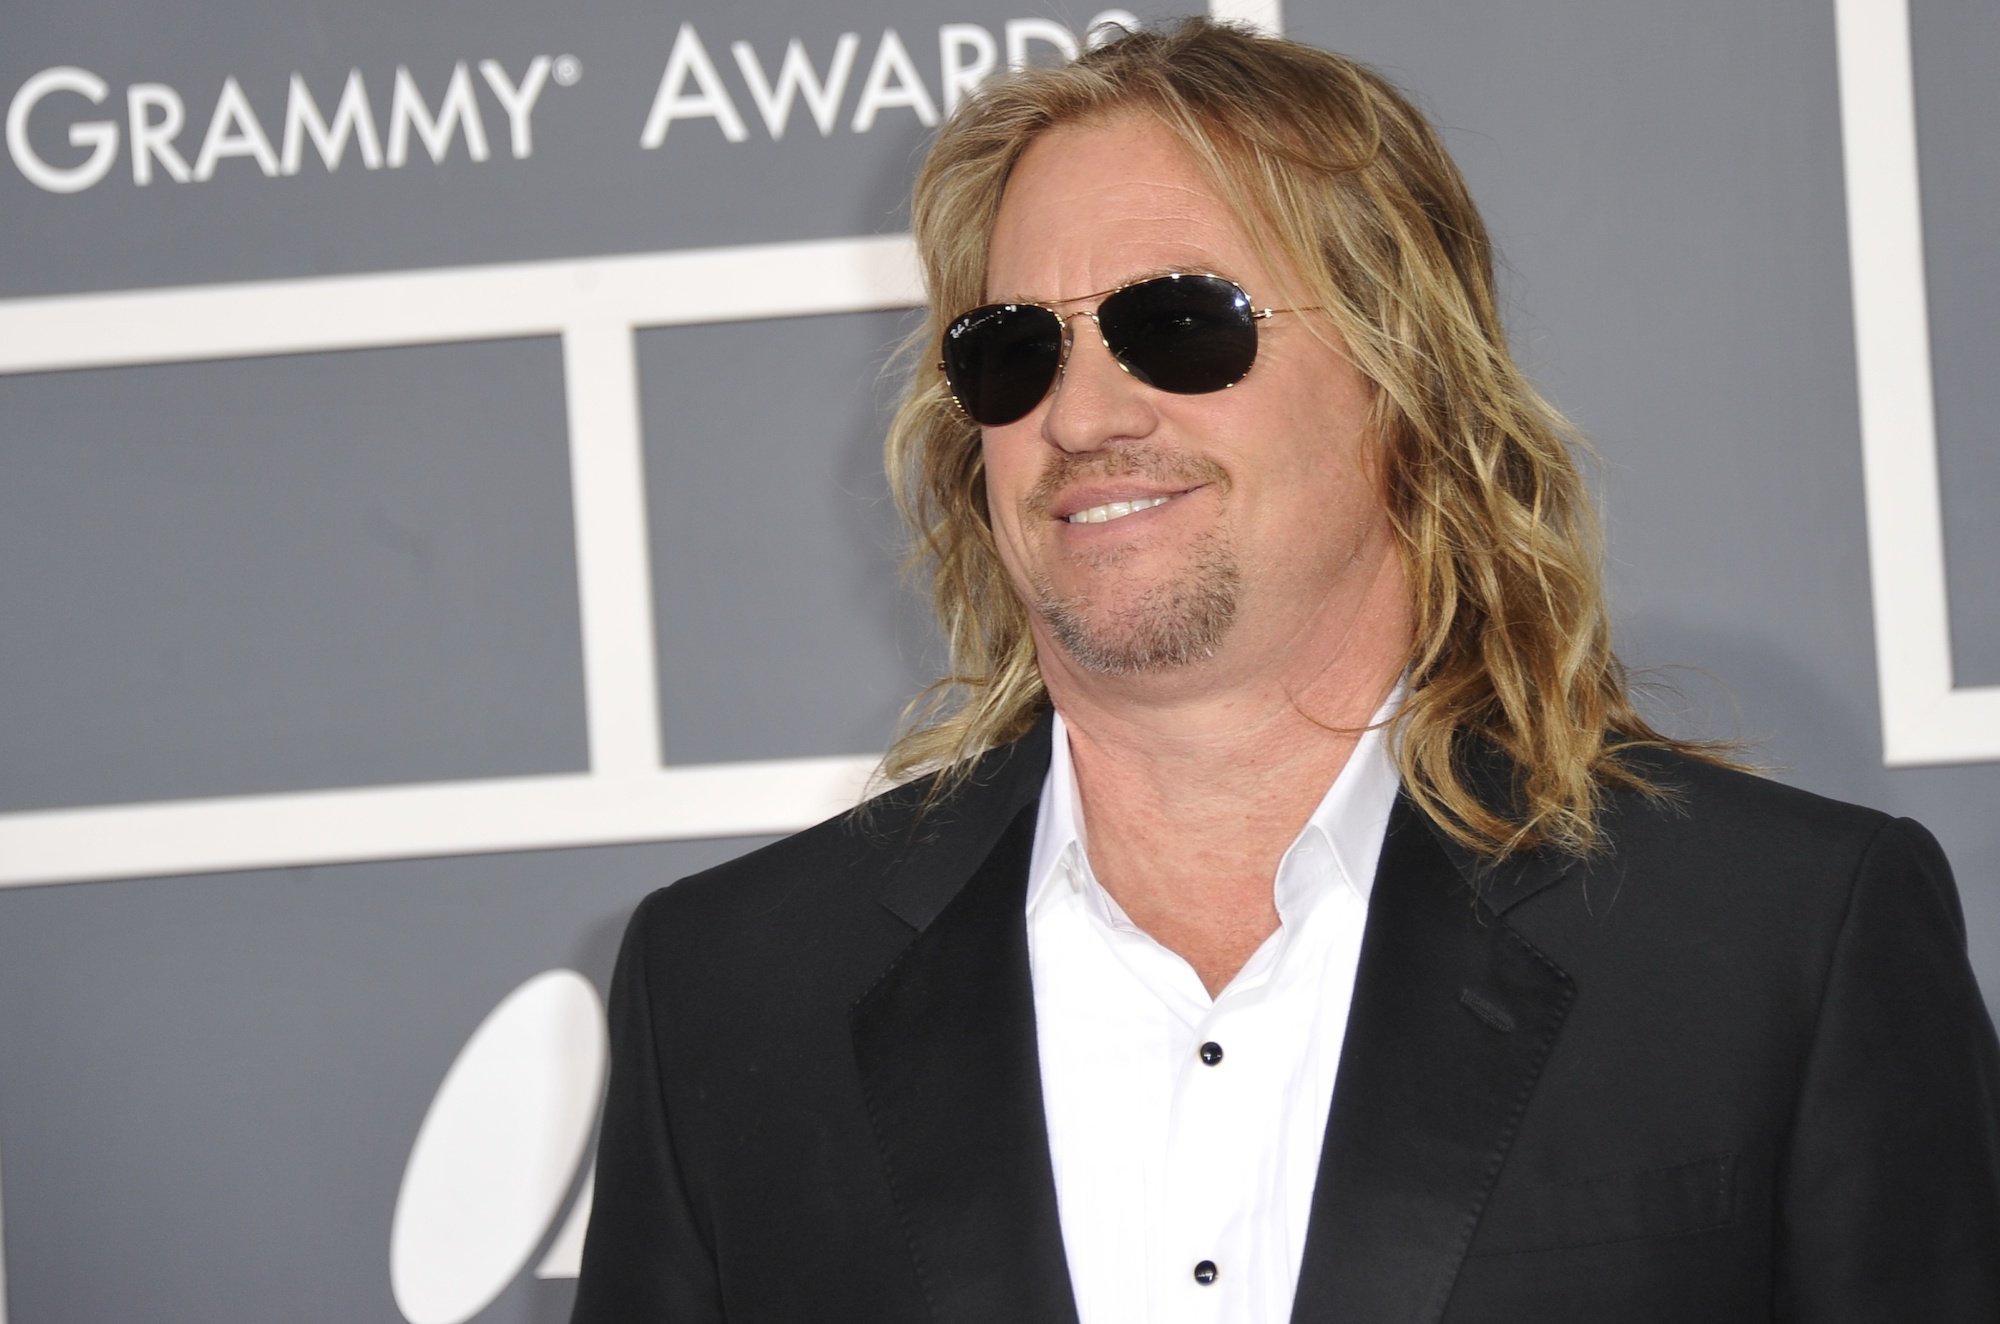 Iceman' Val Kilmer Set to Tell His Story in New Documentary